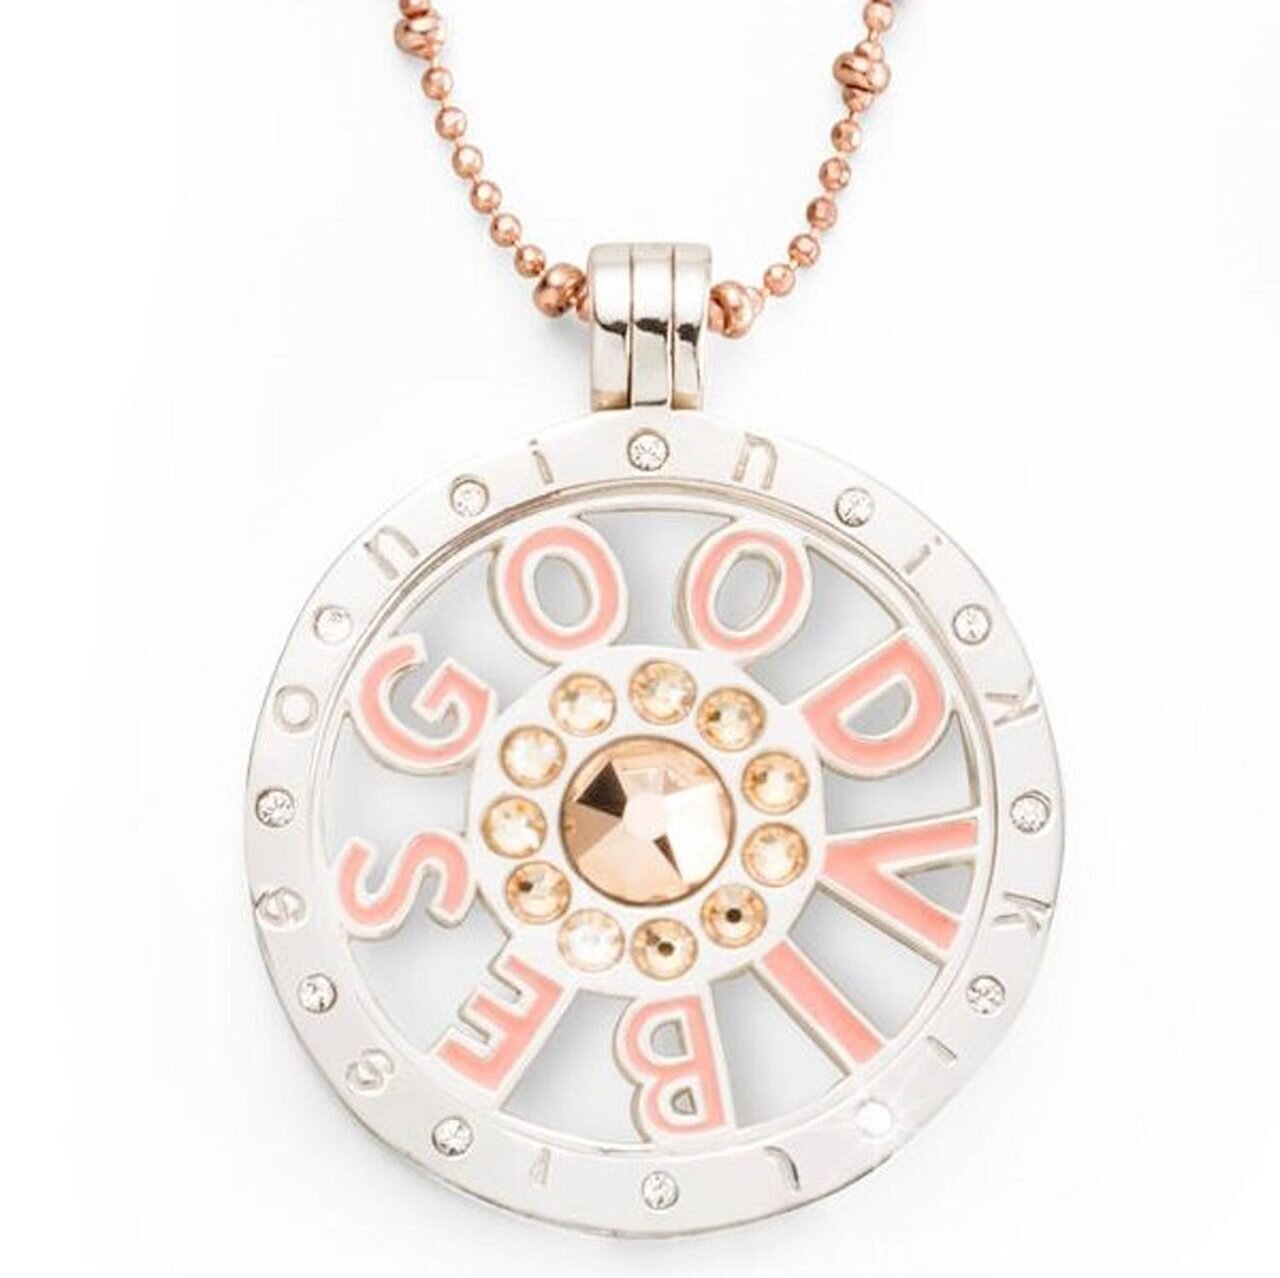 Nikki Lissoni 33mm Coin Inside 35mm Pendant On 60cm Length Chain with Deluxe Gift Box Bag & Pouch SN1604